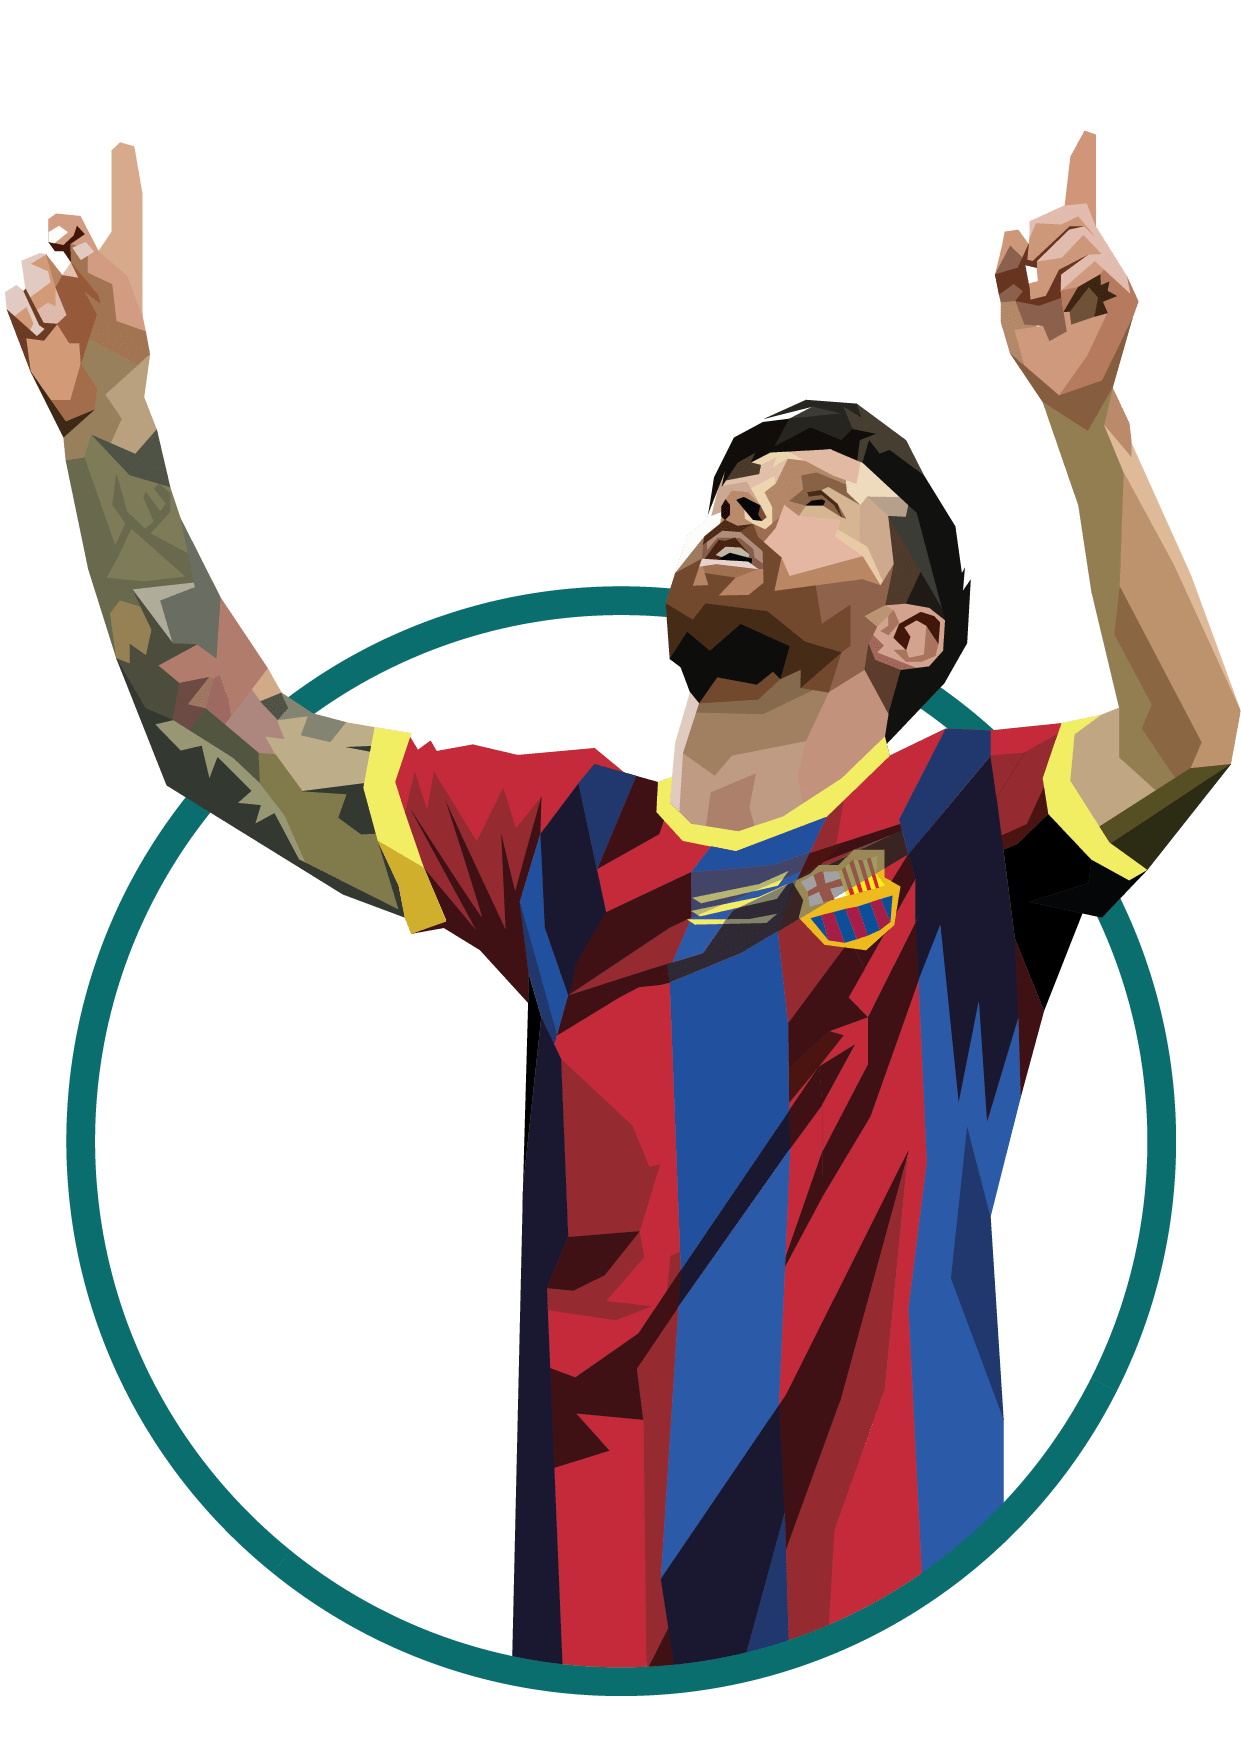 Lionel Messi Best Animated Video | Life journey | Messi, Lionel messi,  Lionel messi wallpapers